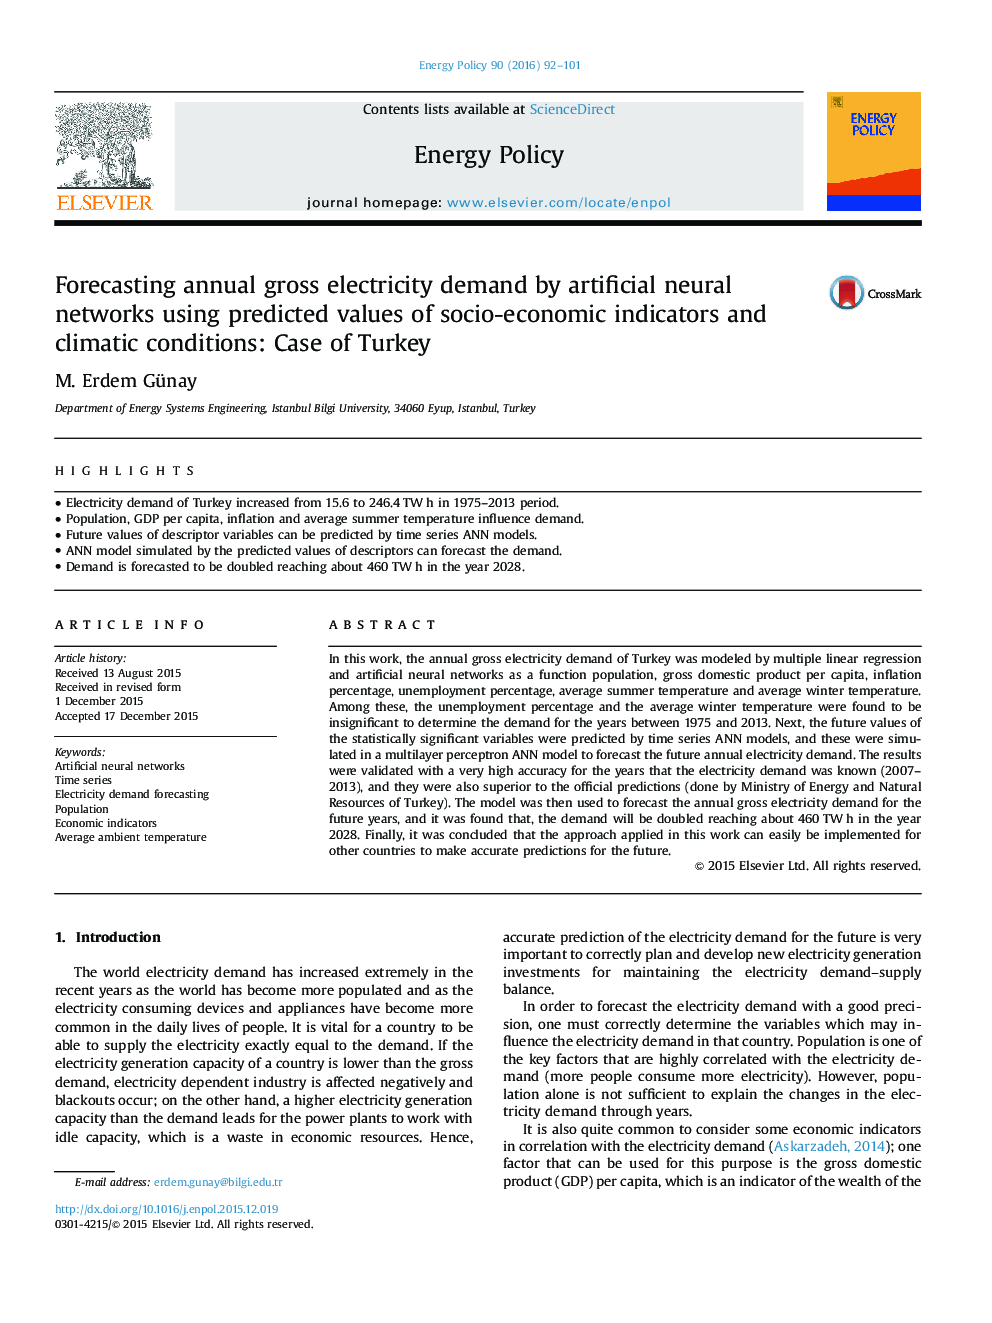 Forecasting annual gross electricity demand by artificial neural networks using predicted values of socio-economic indicators and climatic conditions: Case of Turkey